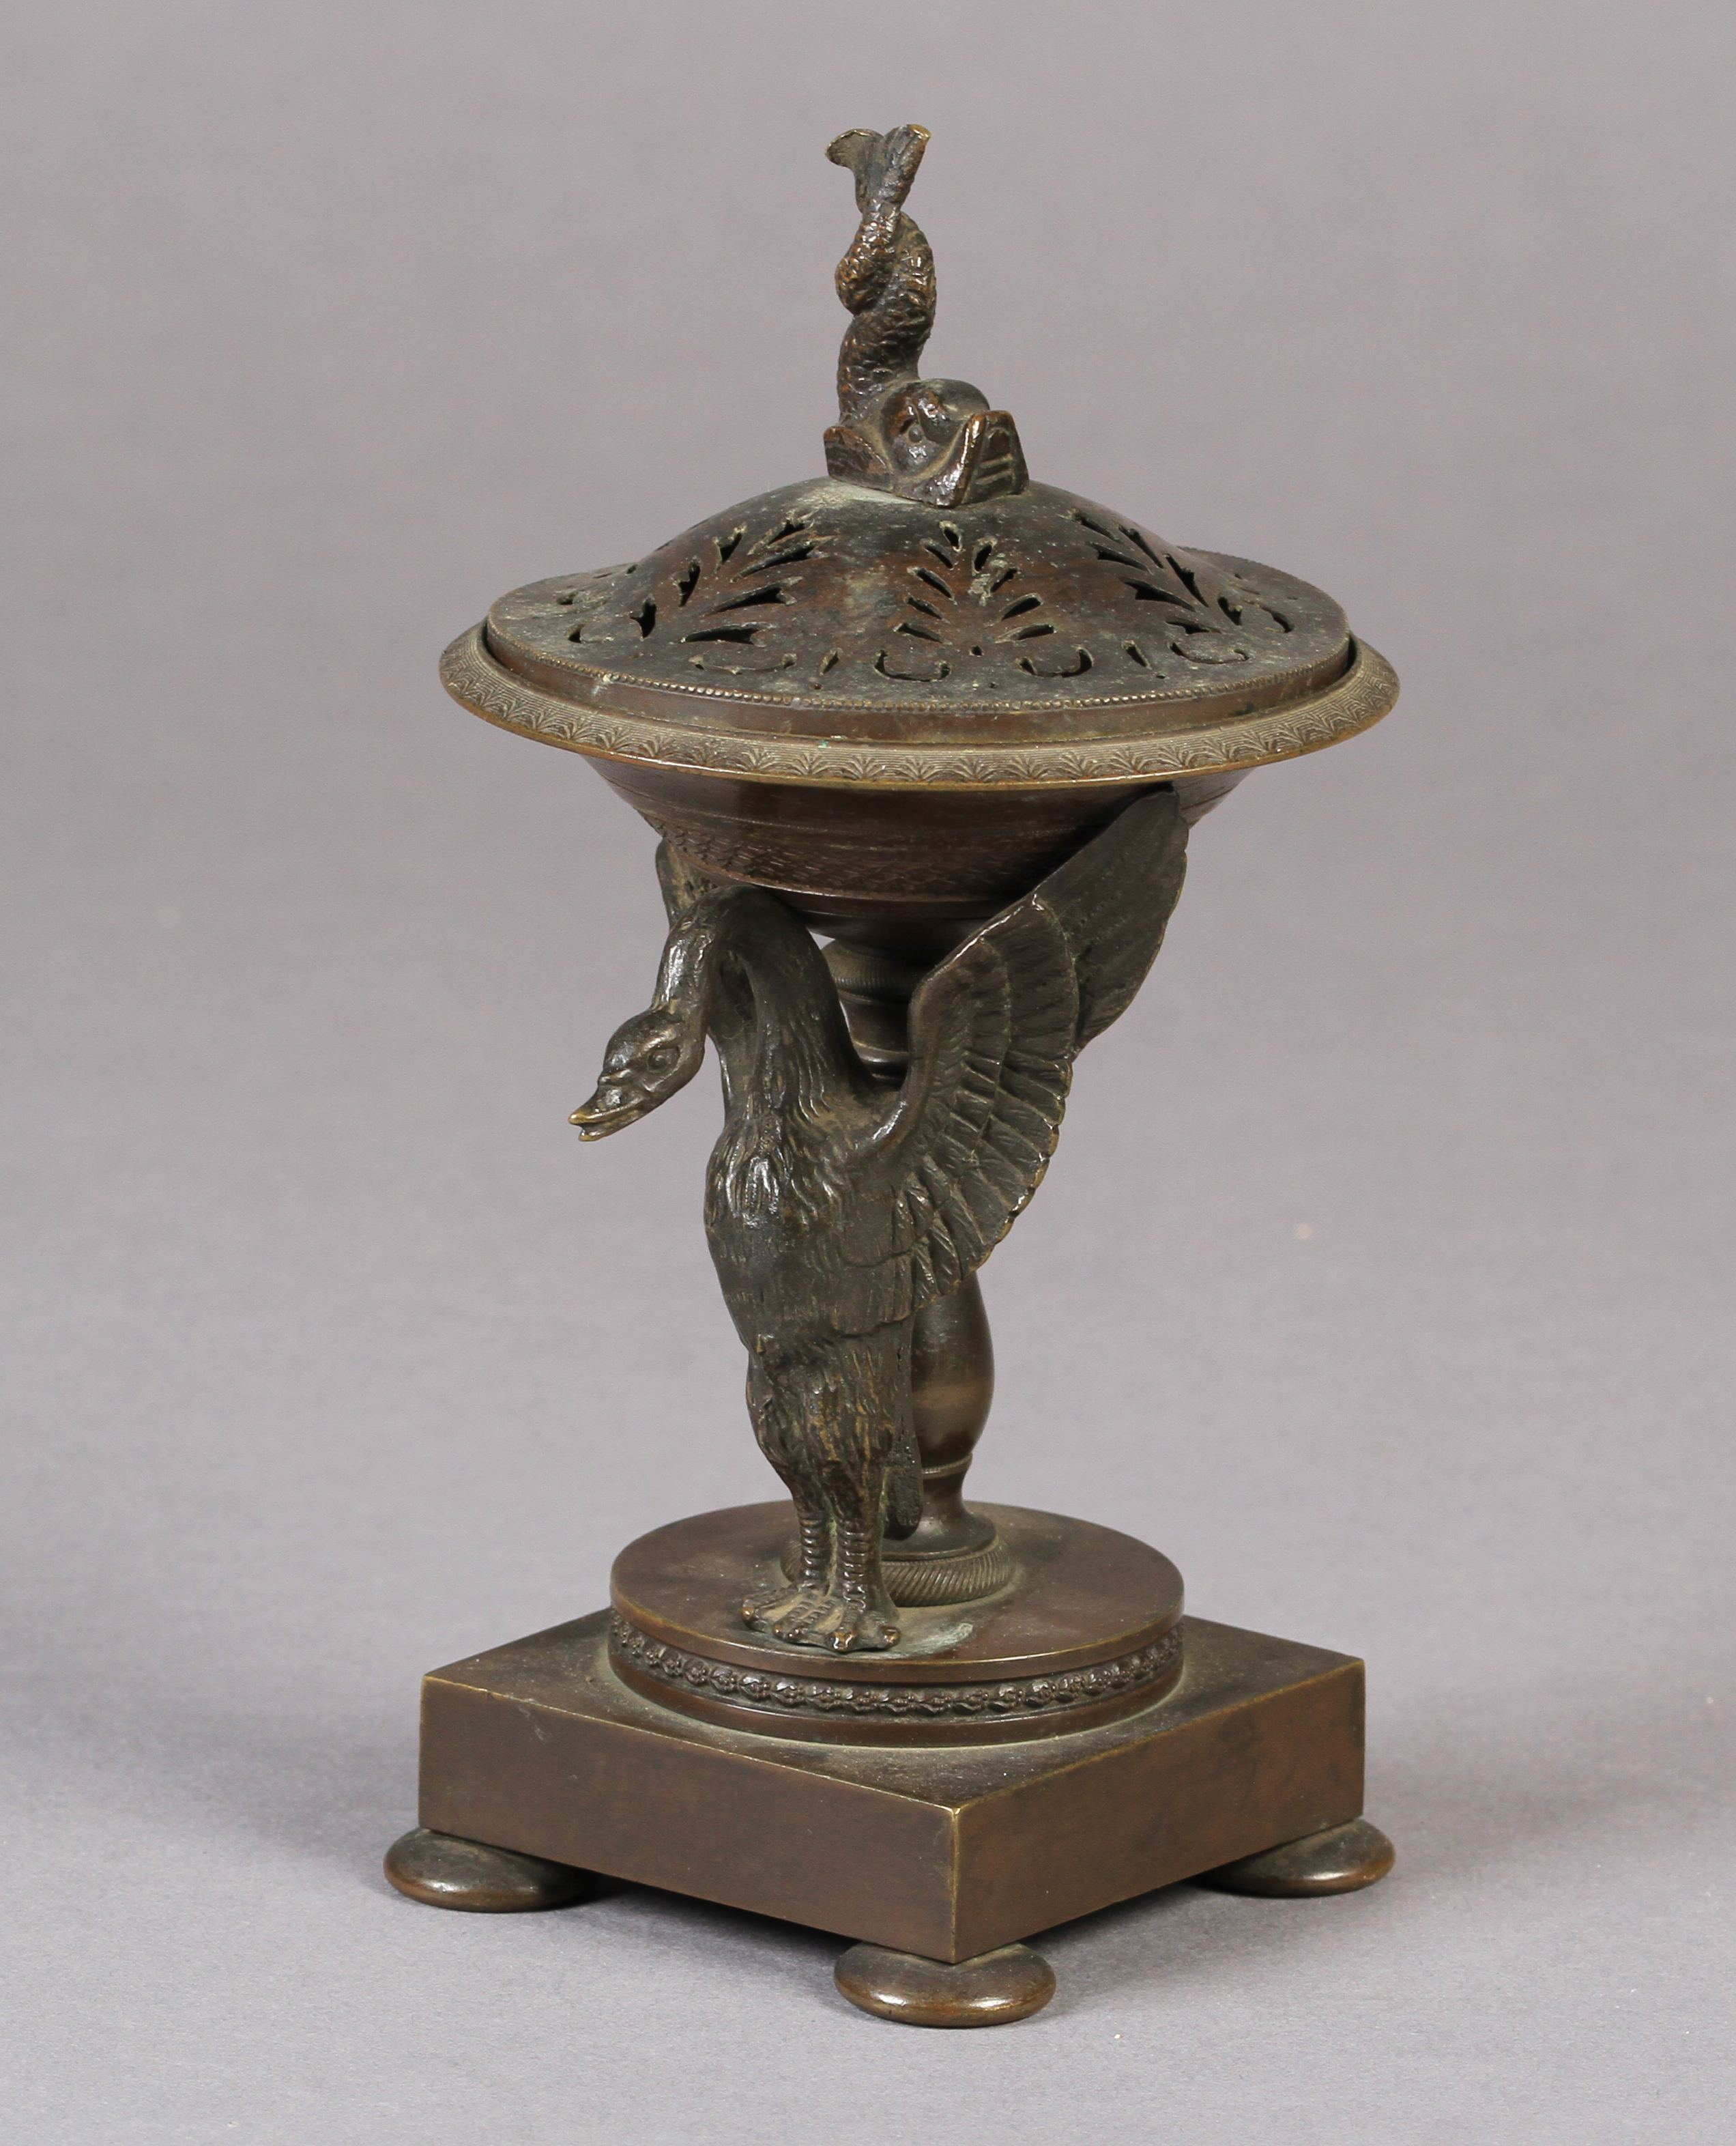 A small 19th century bronze brazier of shallow urn form on a pedestal base, the single swan mount